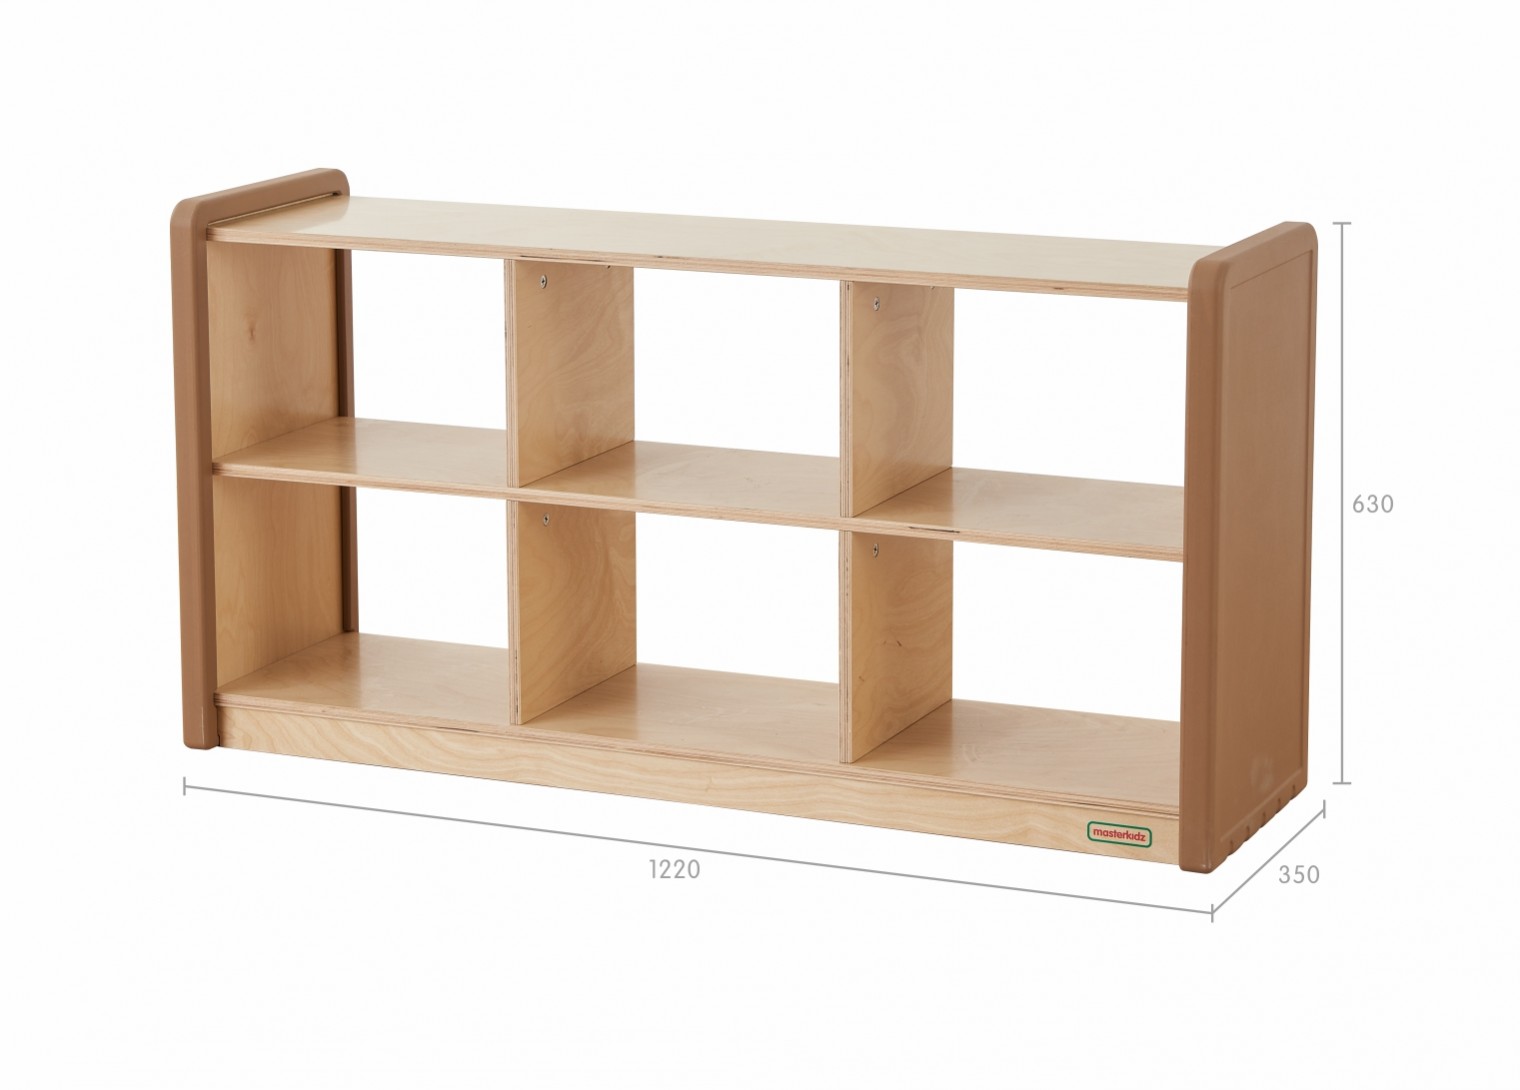 SoftEdge Toddler Play Center 620H x 1200L 6-Compartment Shelving Unit - Open Back